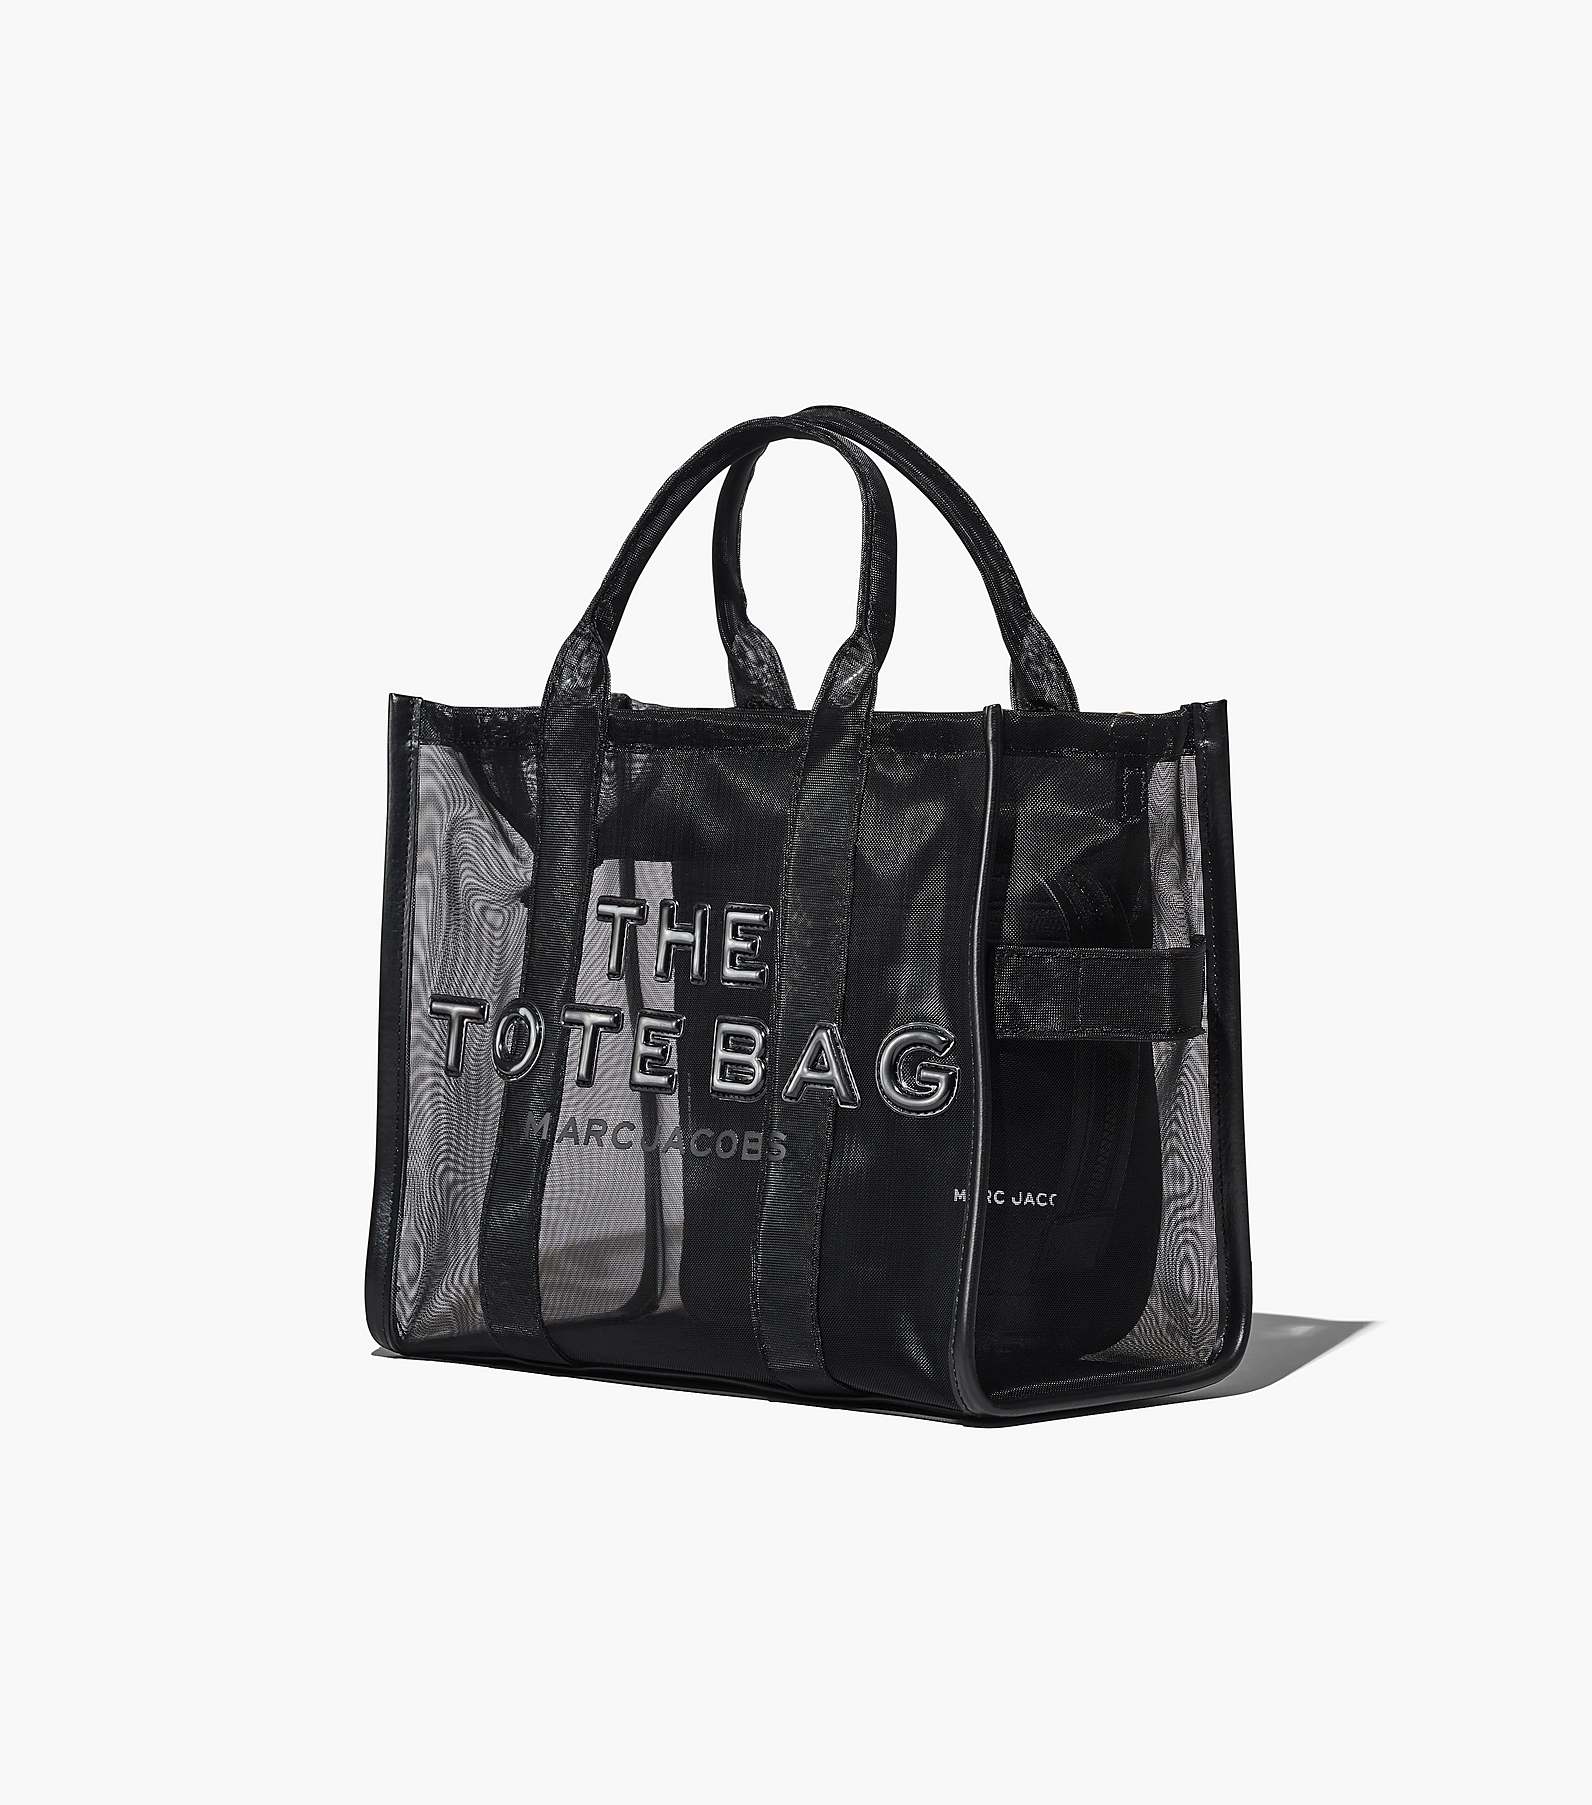 The Mesh Medium Tote Bag | Marc Jacobs | Official Site